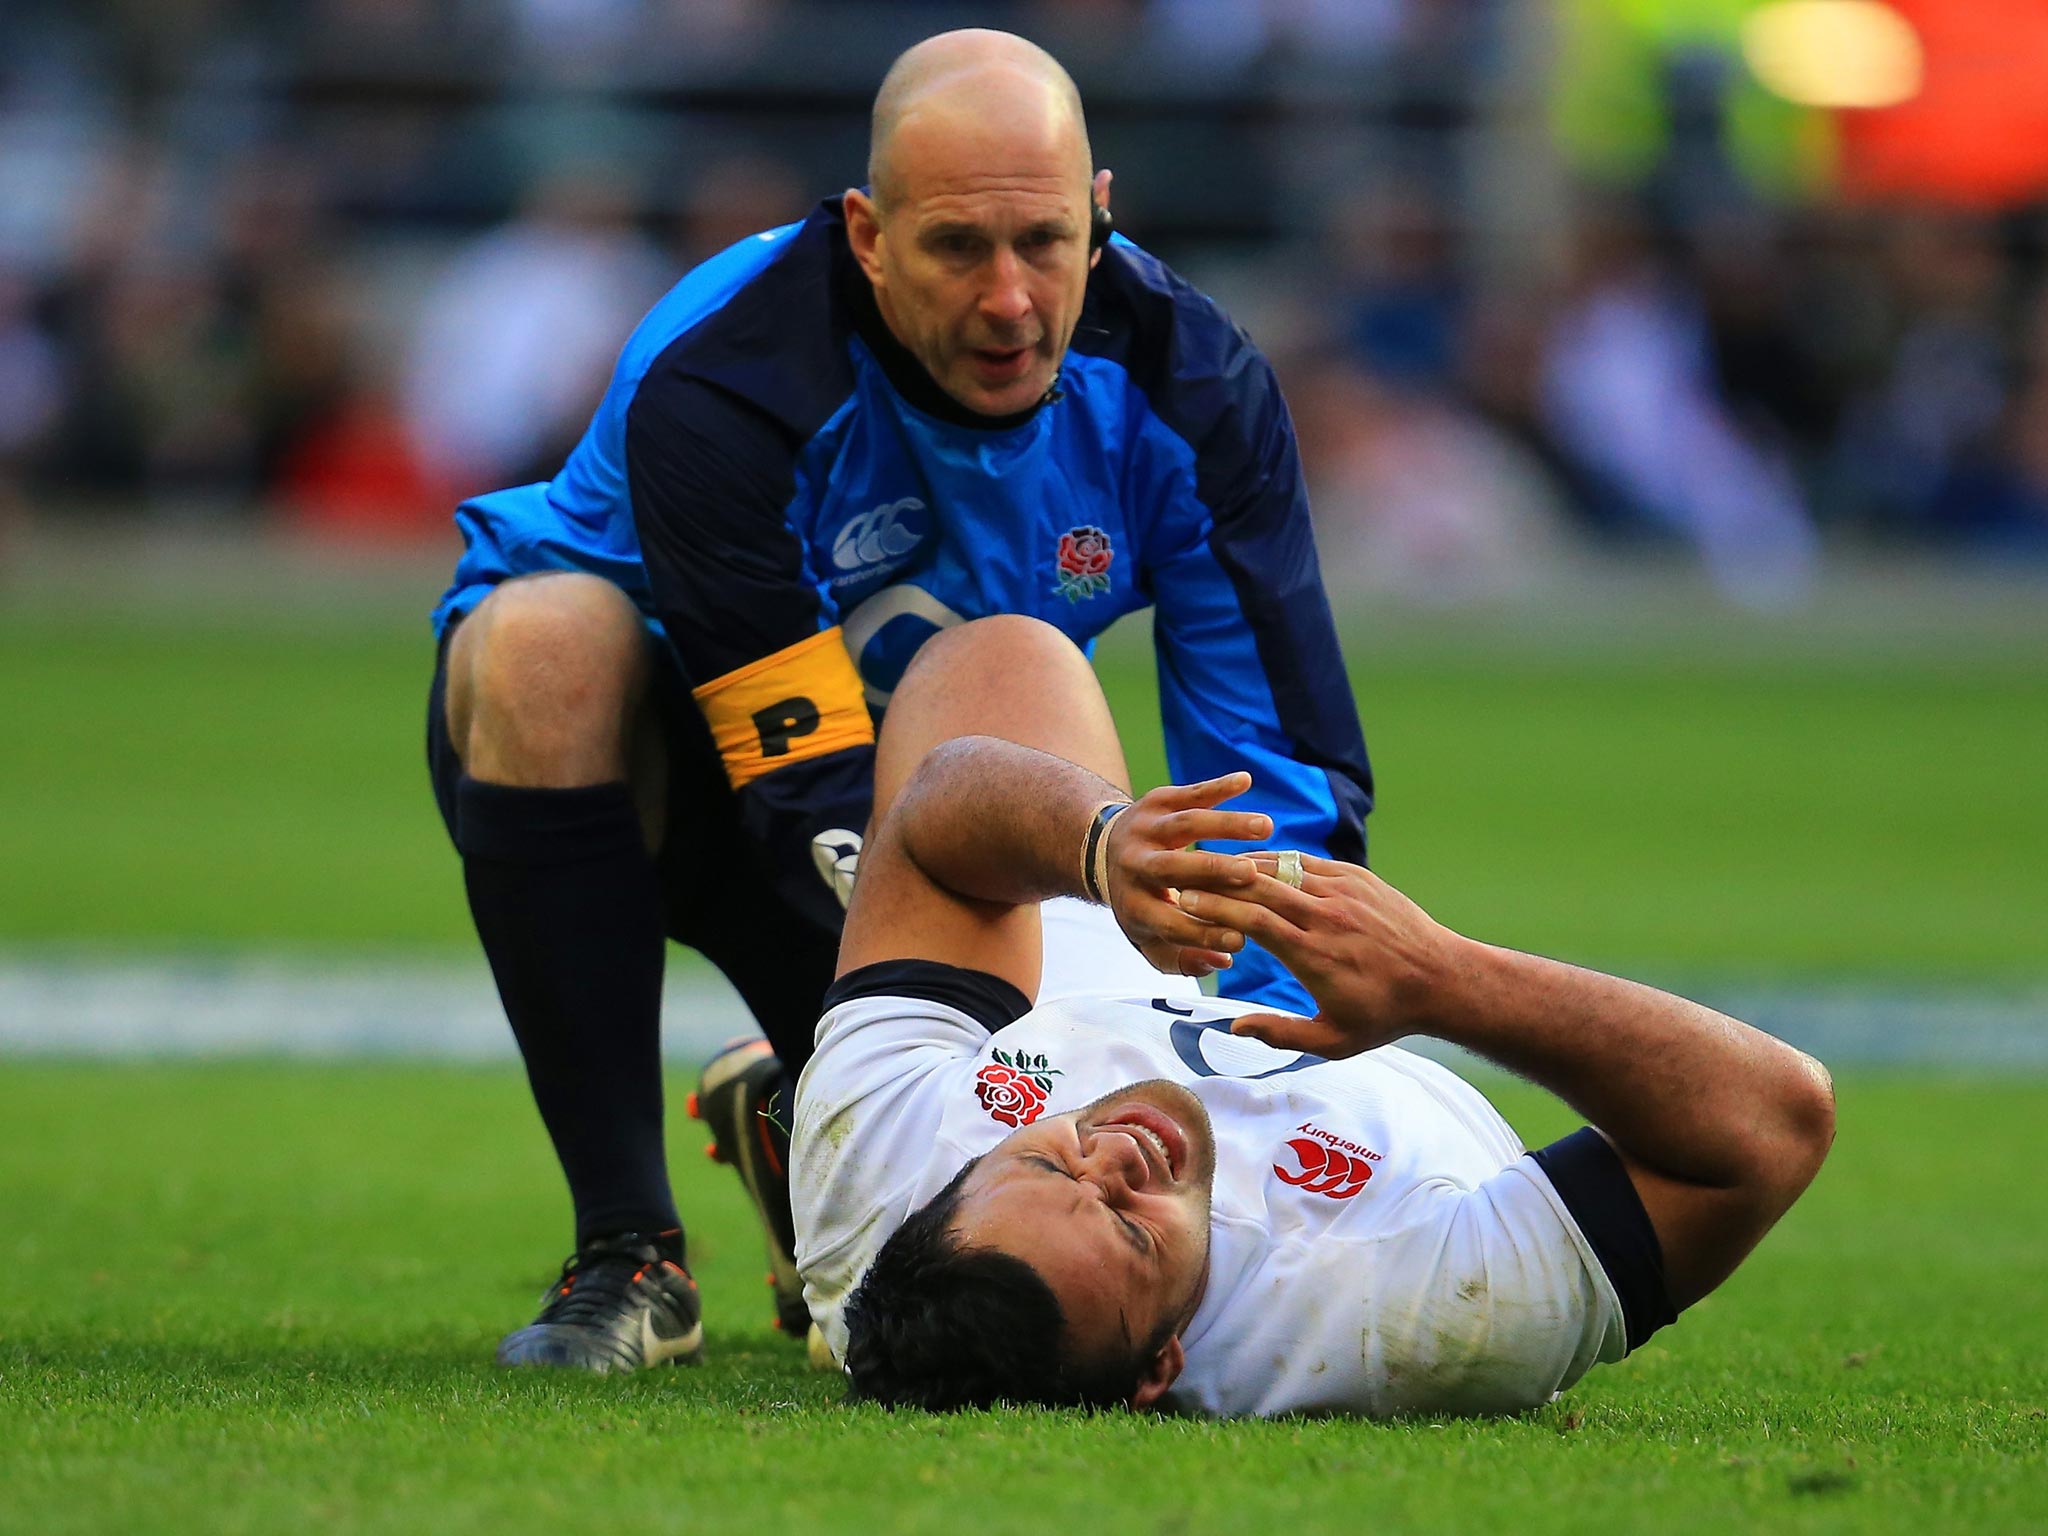 Billy Vunipola receives treatment on his injured ankle at Twickenham on Saturday (Getty Images)